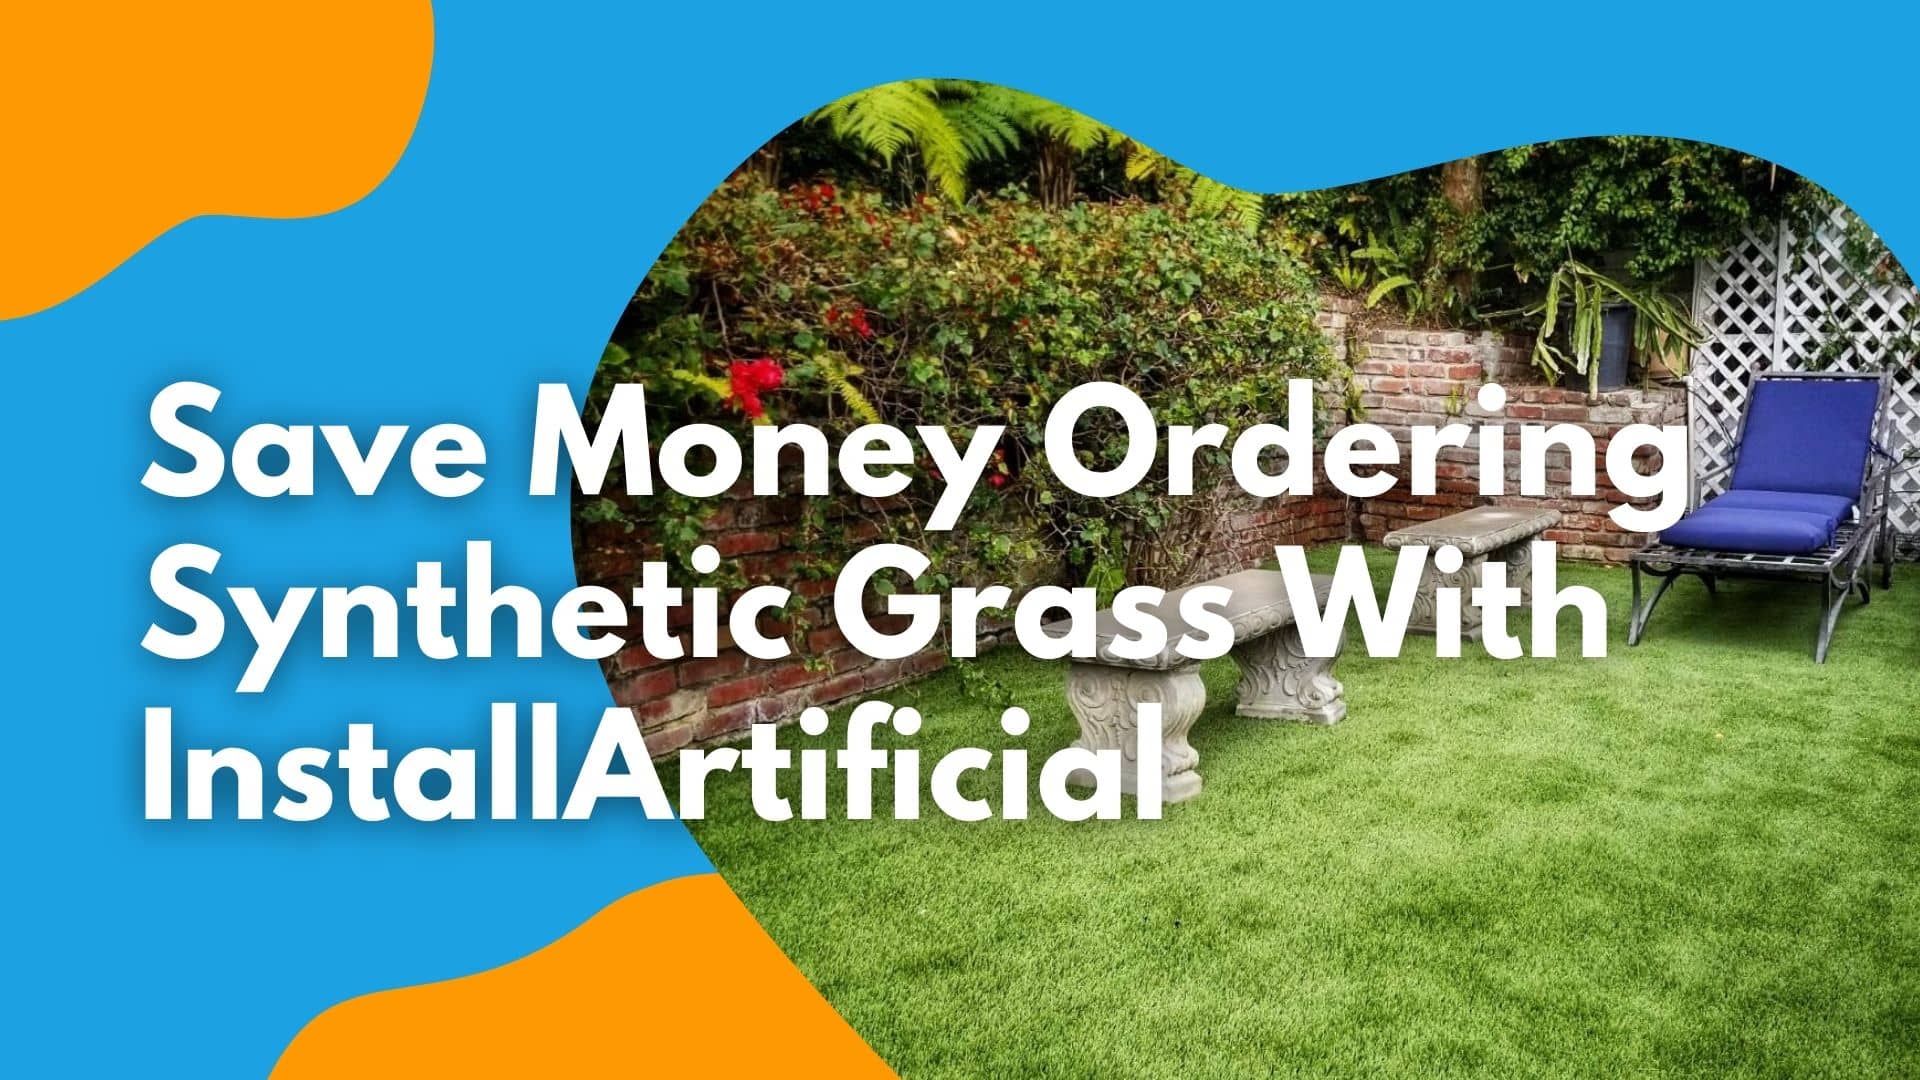 save money ordering artificial grass online with installartificial